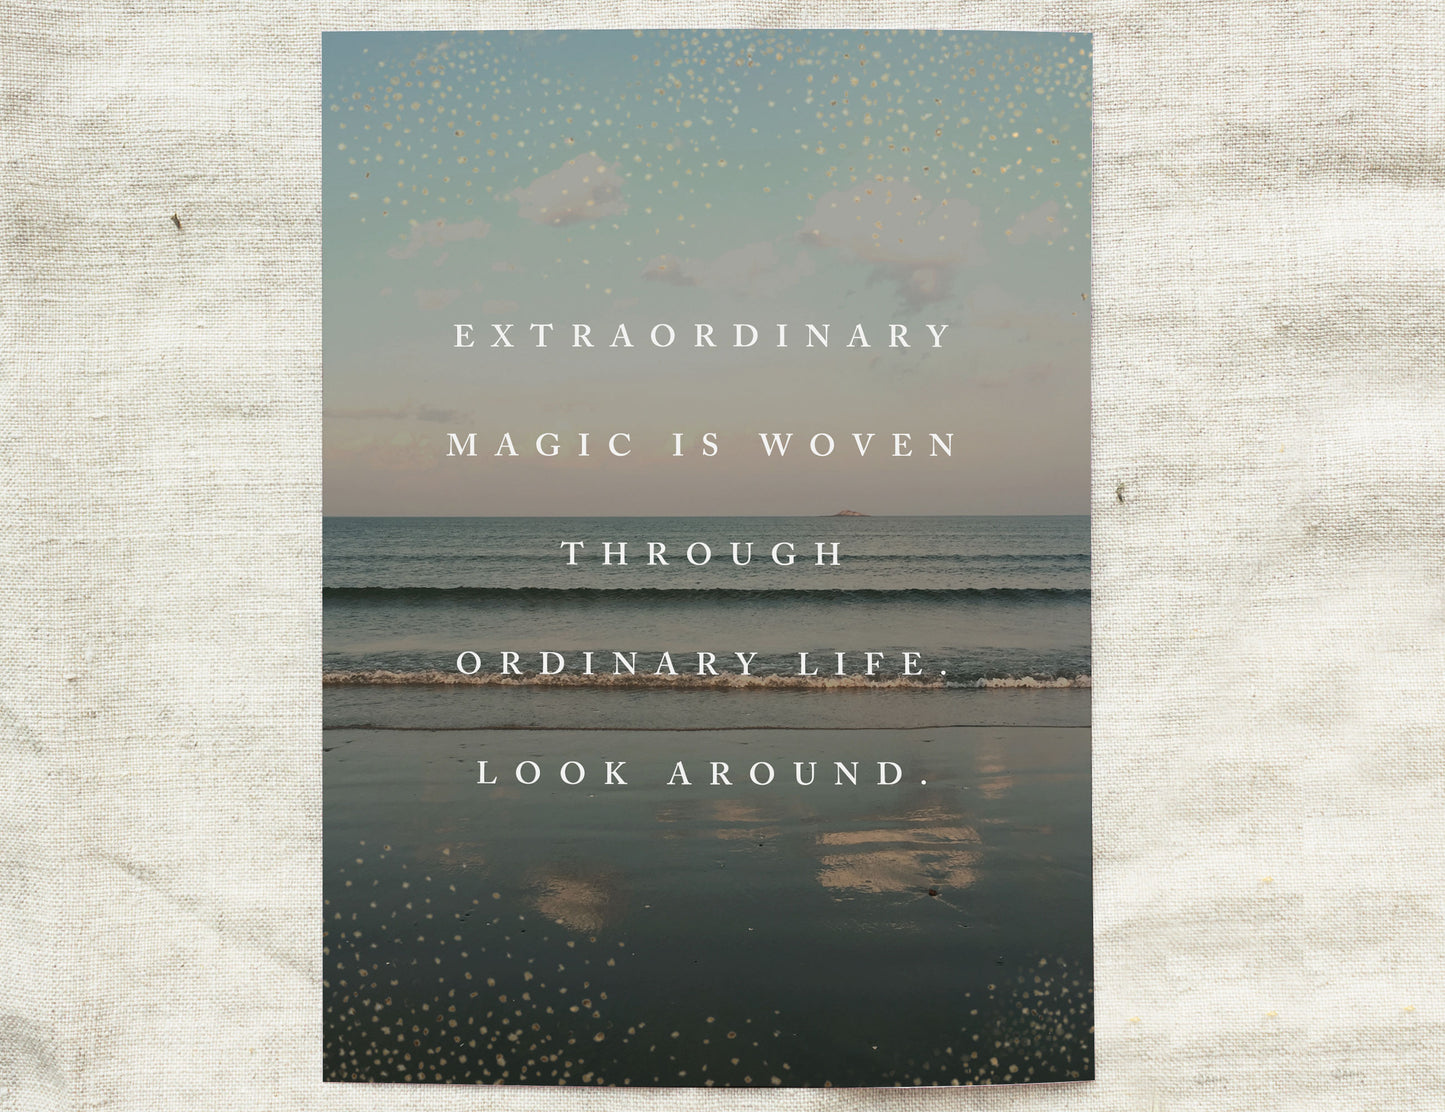 Beach photography quote art "Extraordinary magic is woven through ordinary life. Look around."